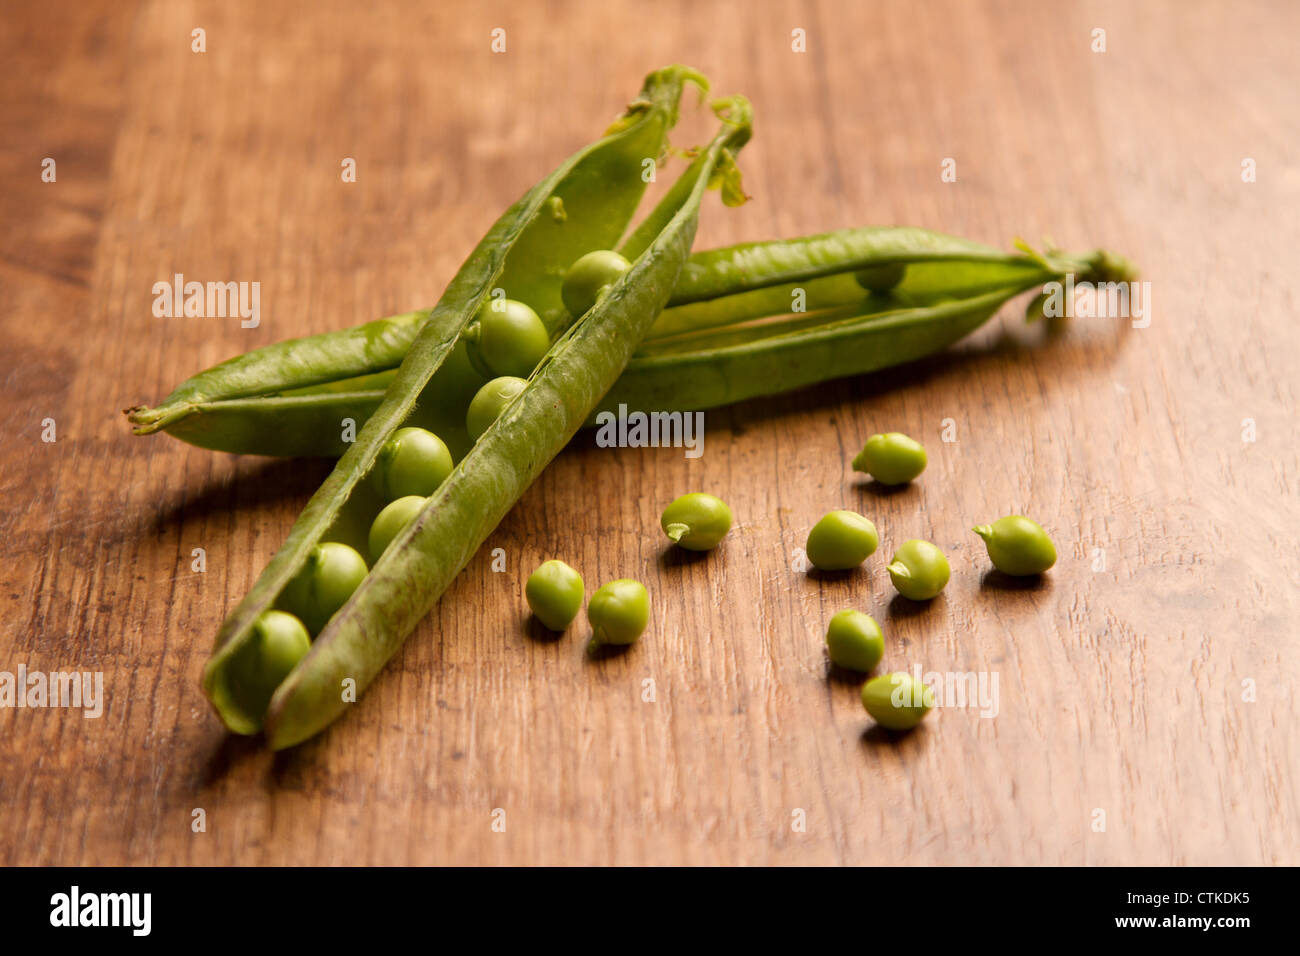 Two open pea pods with some loose peas, placed on a wooden background Stock Photo